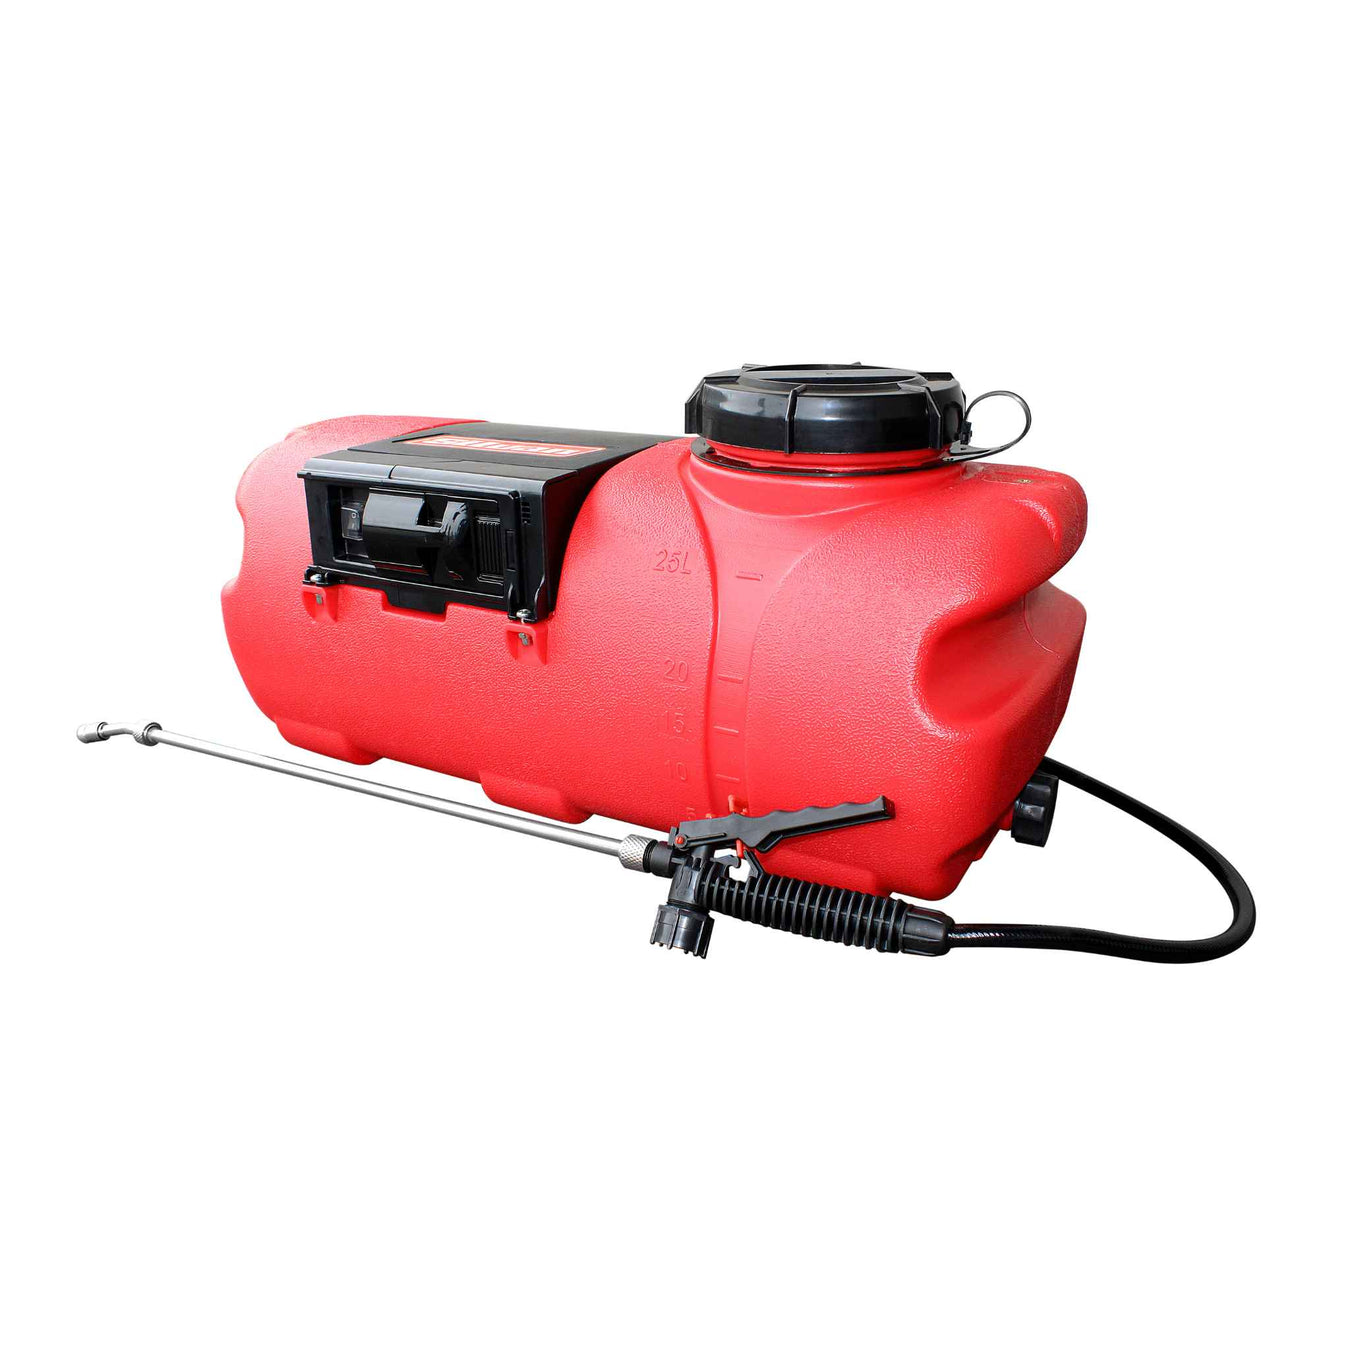 Sprayers # Rechargeable # ELECTRIC Pump